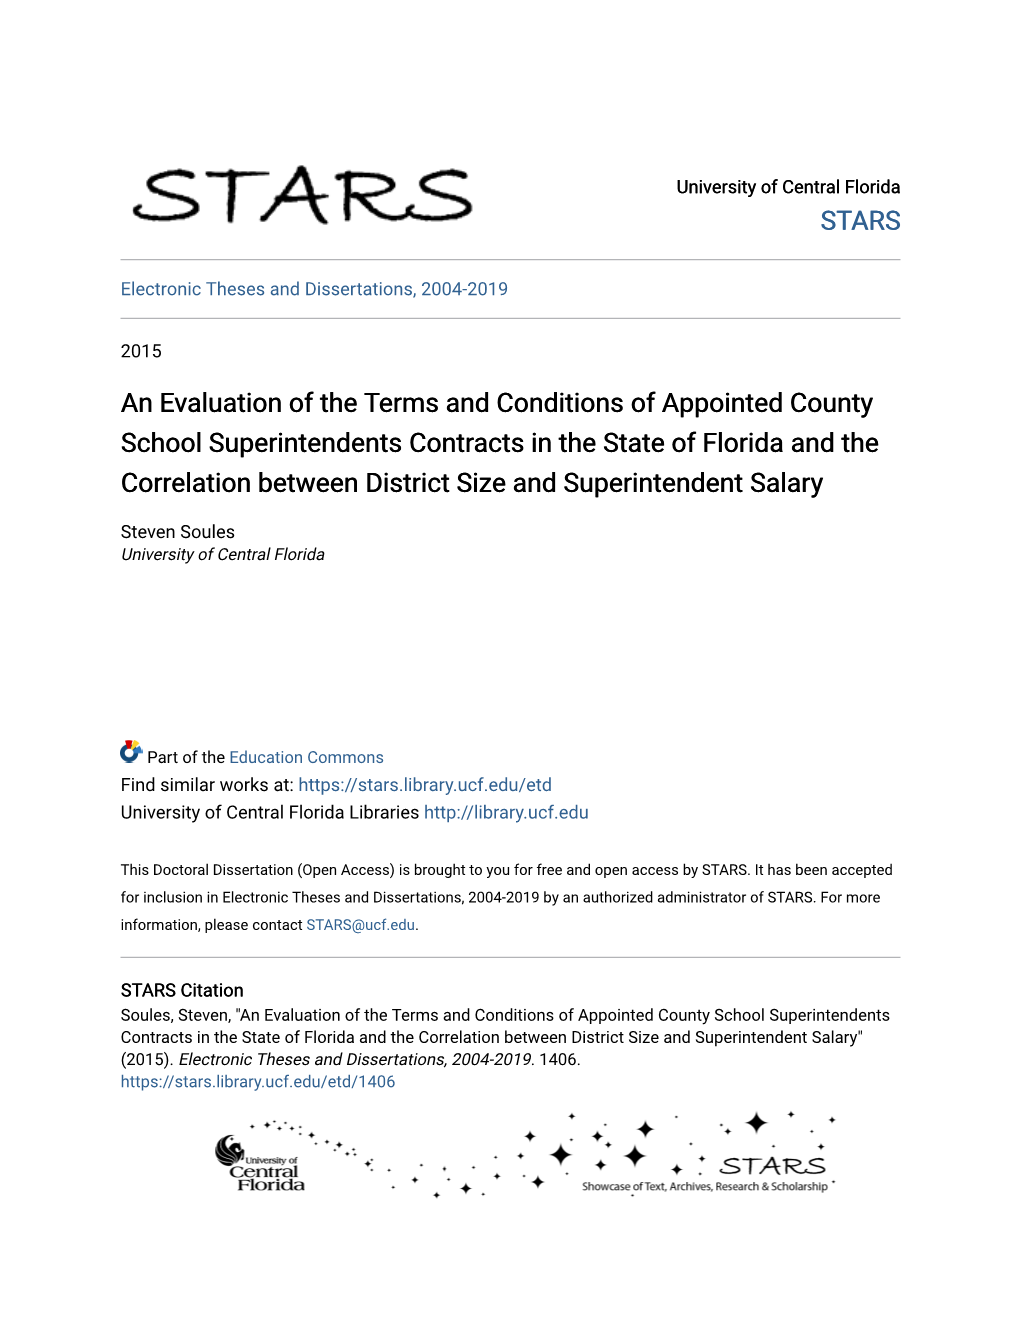 An Evaluation of the Terms and Conditions of Appointed County